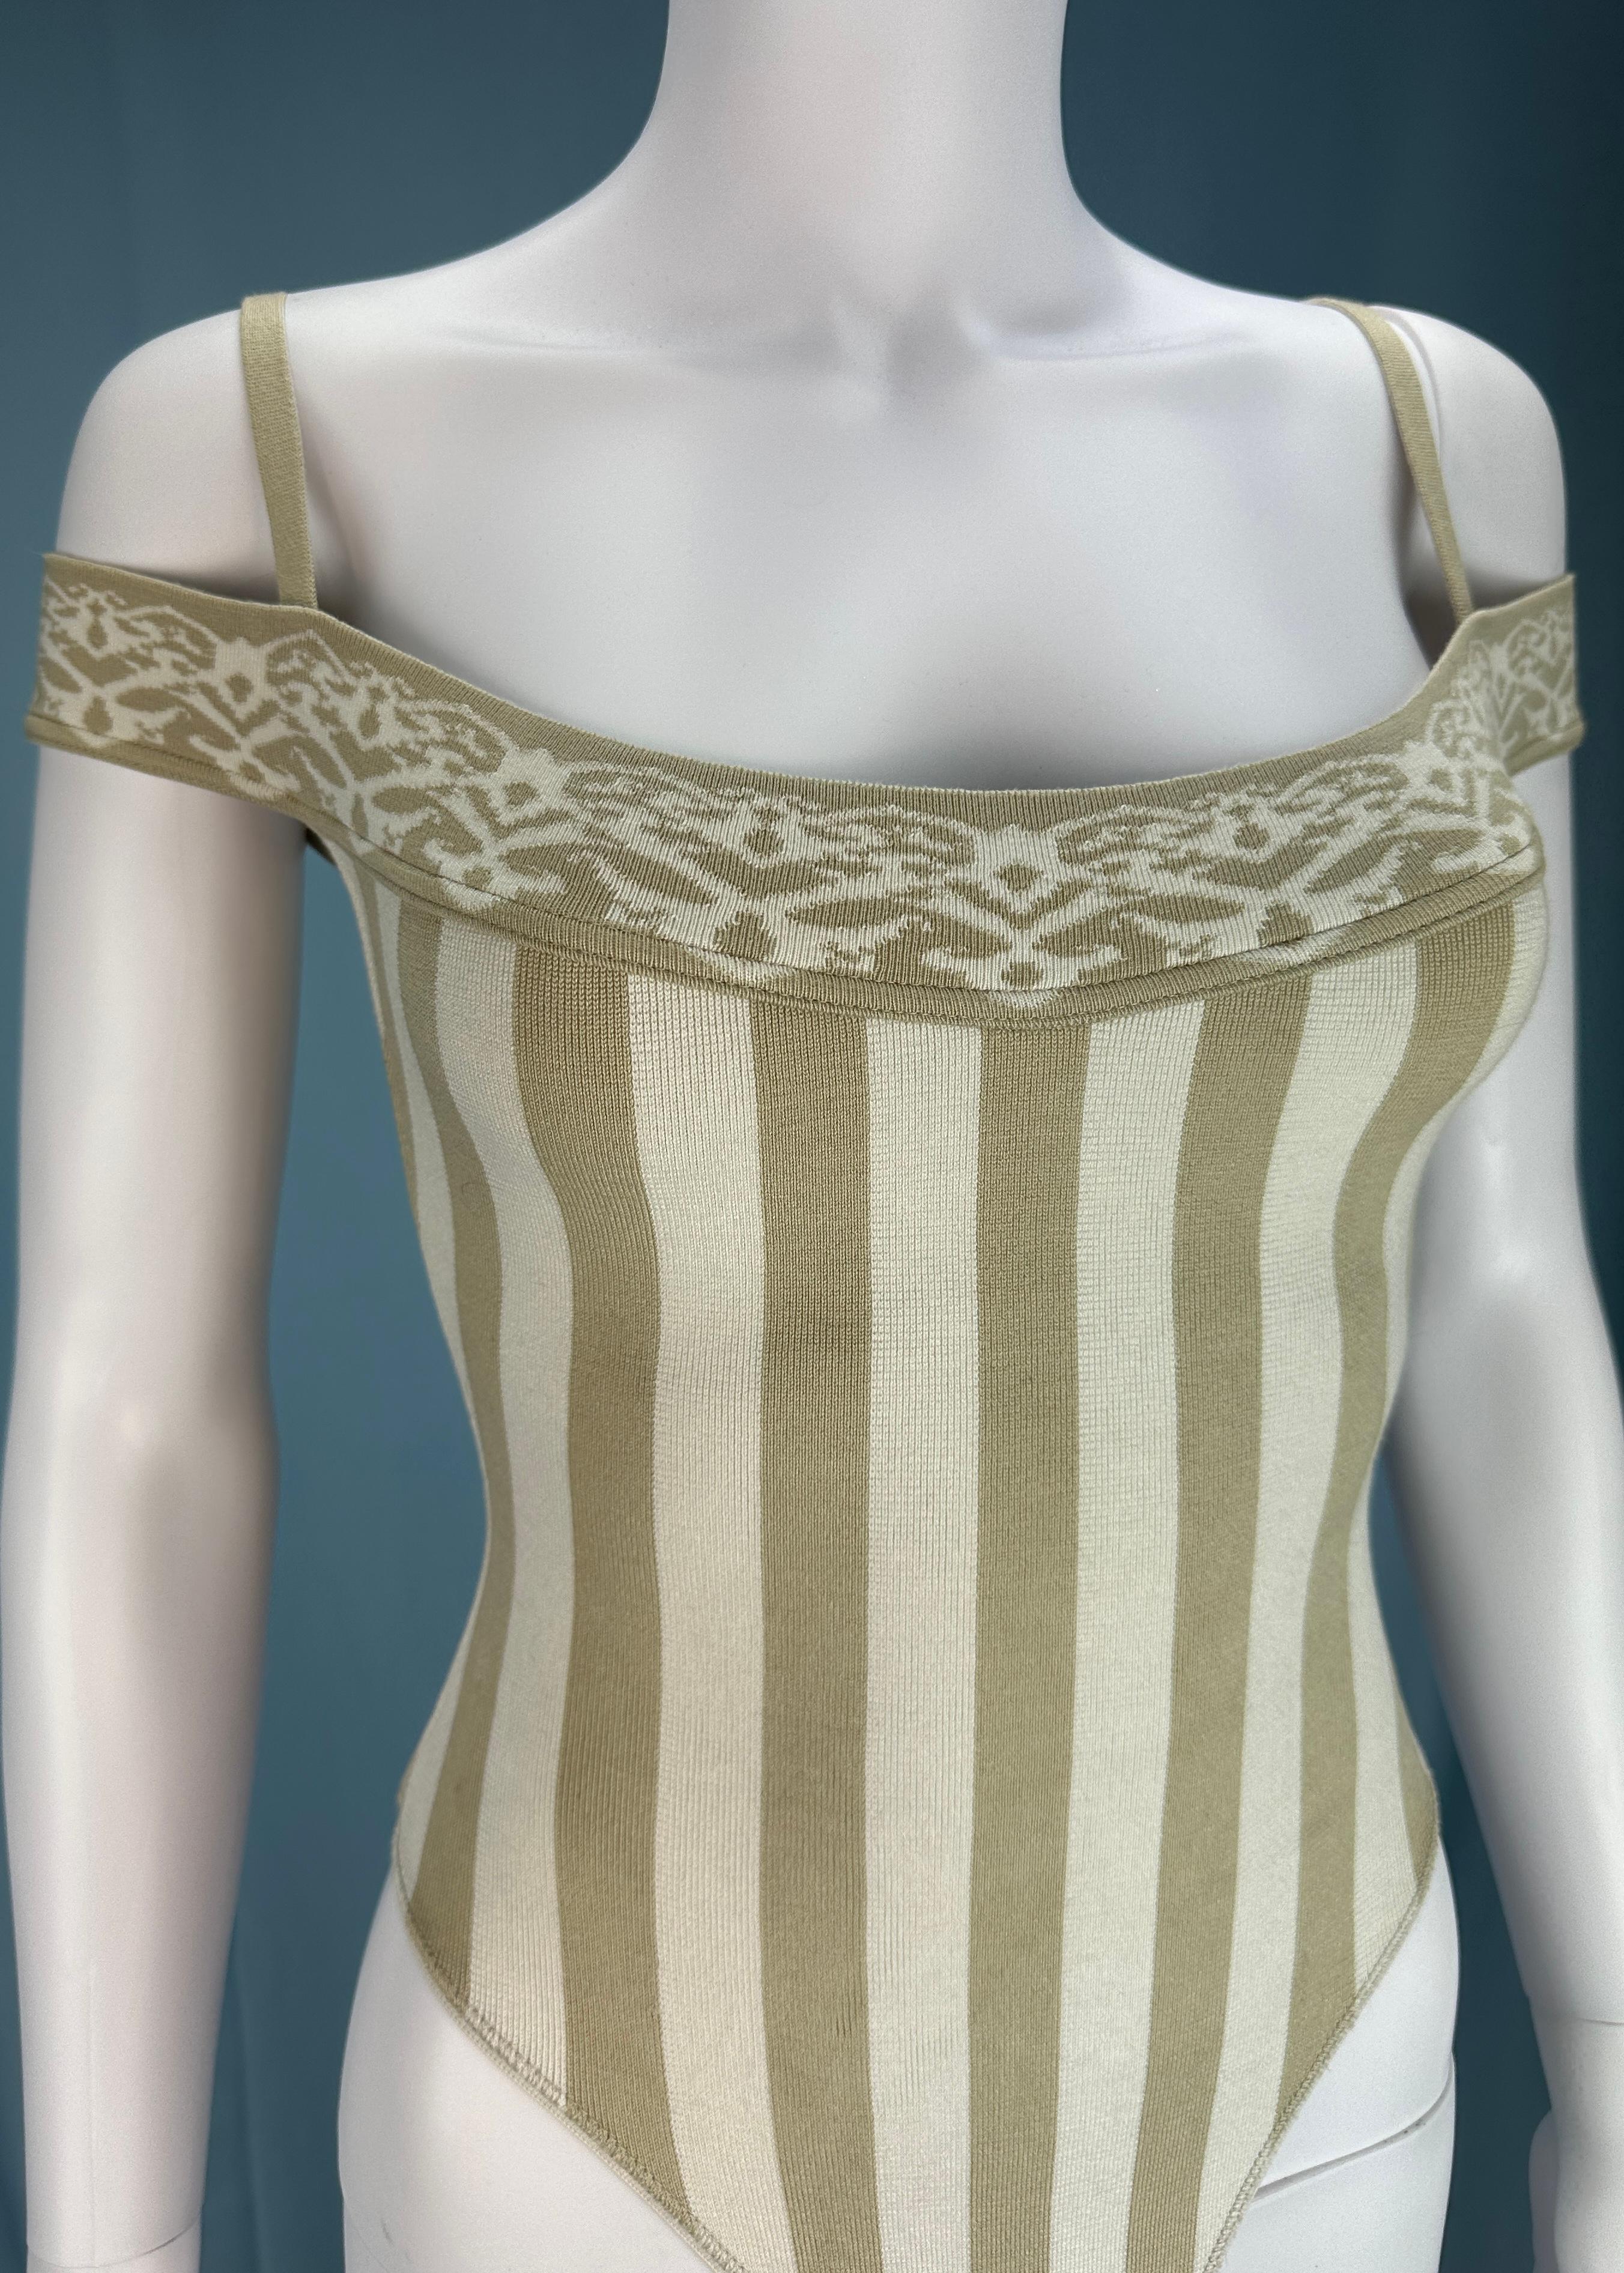 Azzedine Alaia Spring 1992 Off Shoulder Striped Bodysuit In Excellent Condition For Sale In Hertfordshire, GB